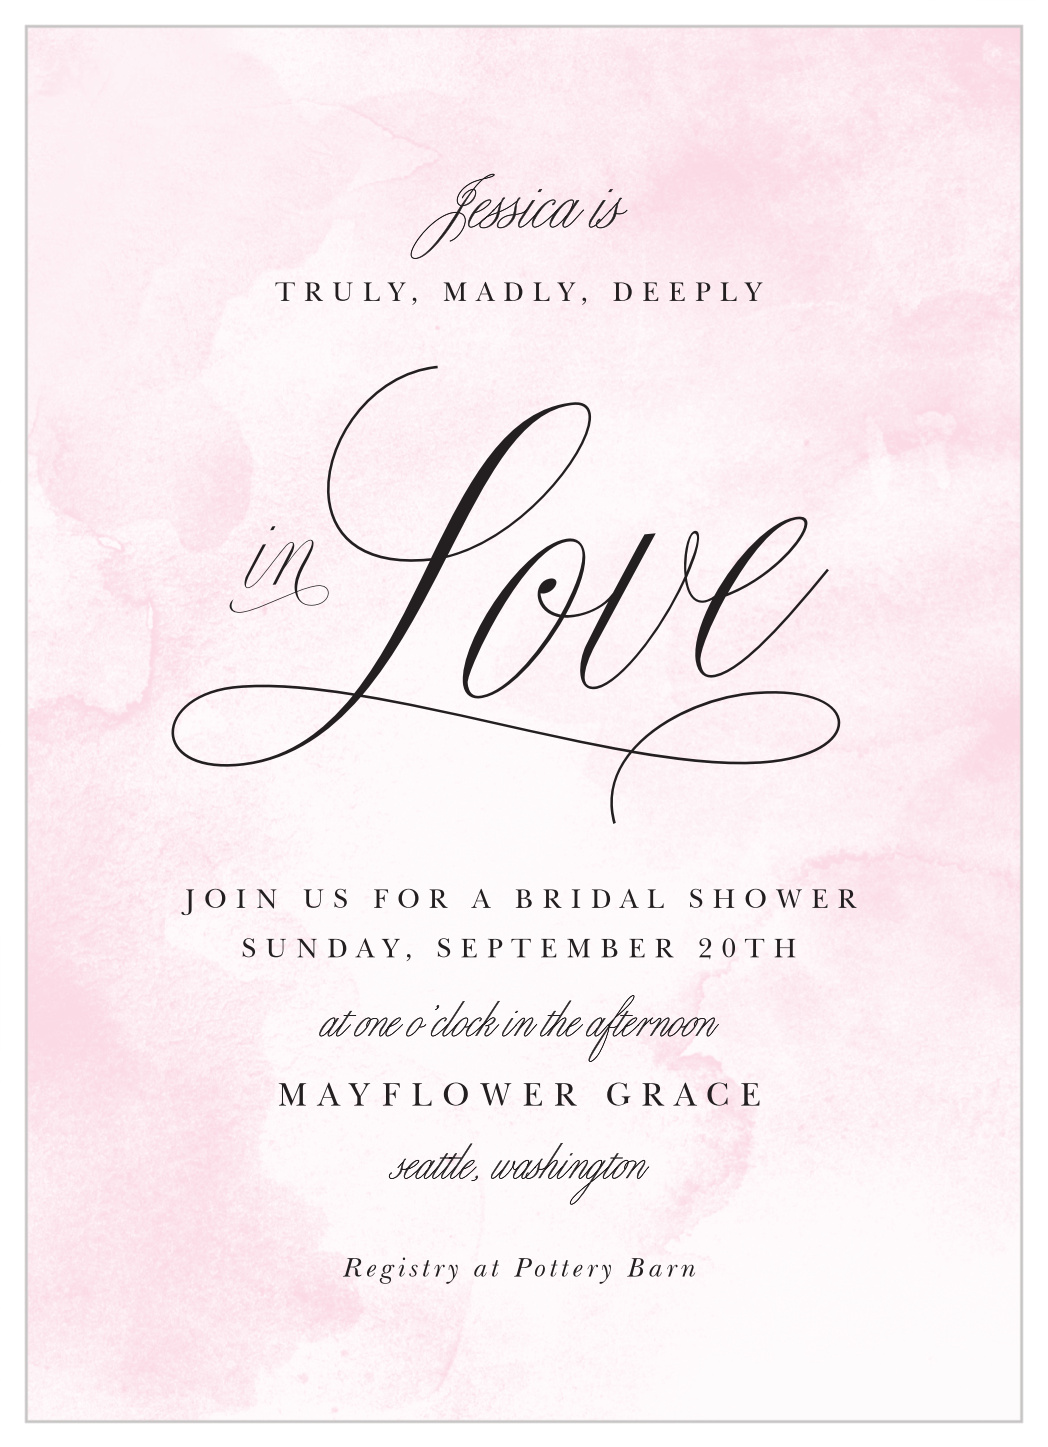 Truly Madly Deeply Bridal Shower Invitations